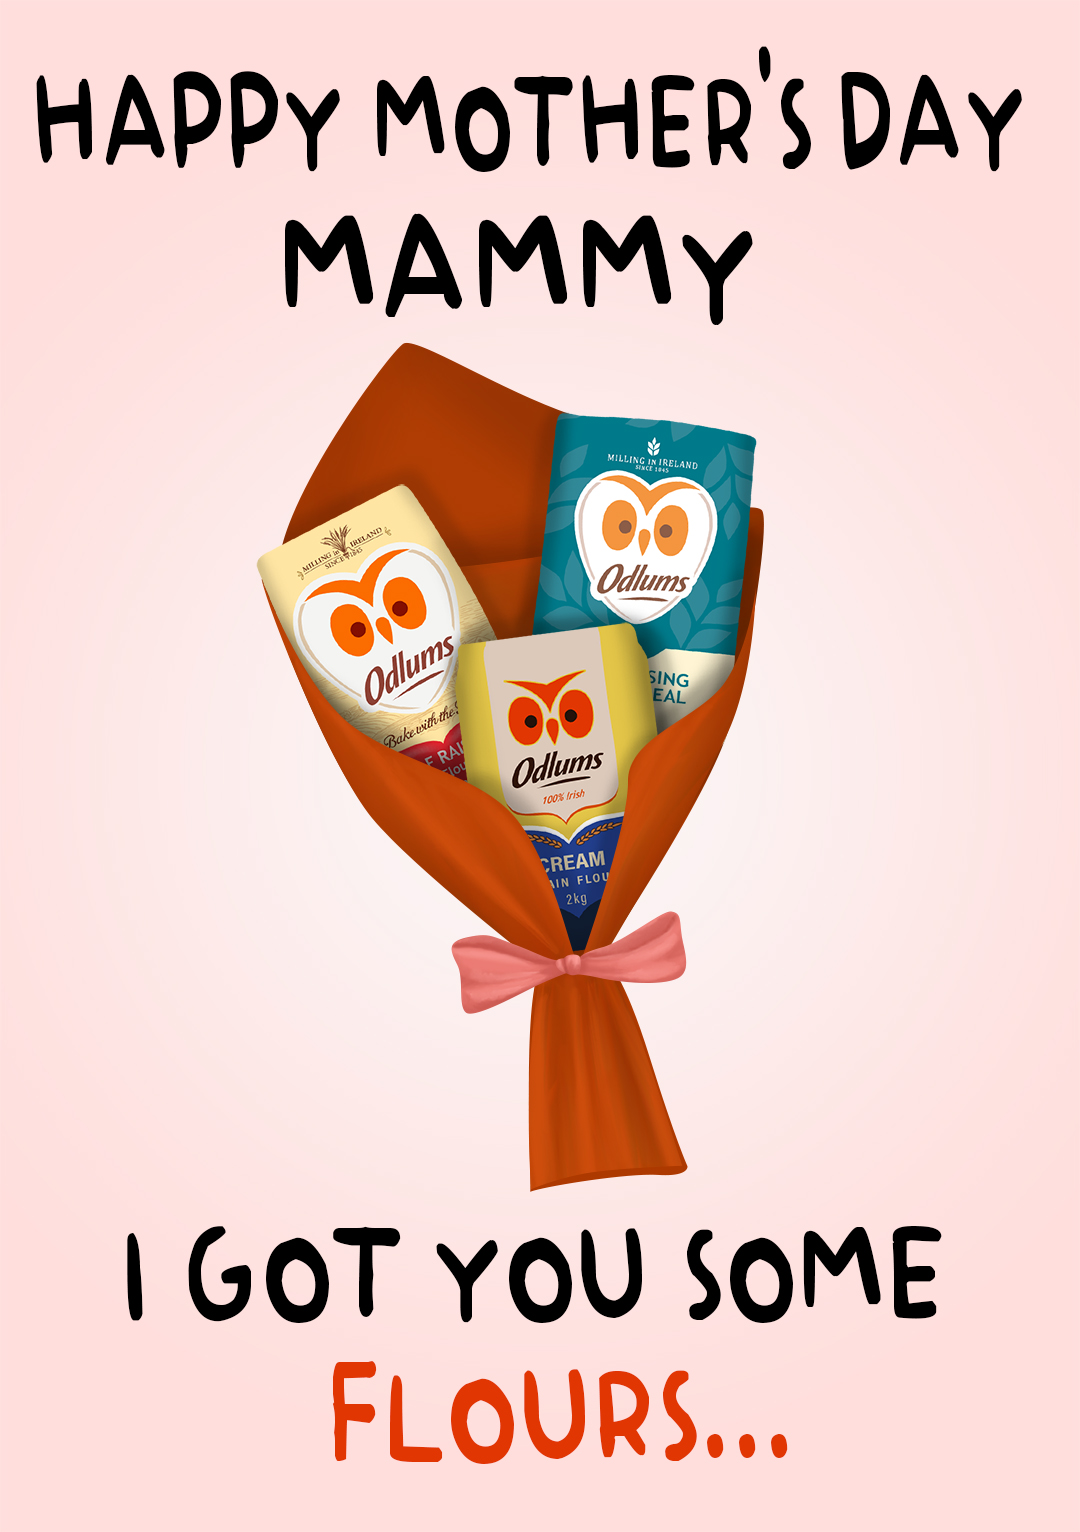 I Got You Some Flours Mam...Mother's Day Card